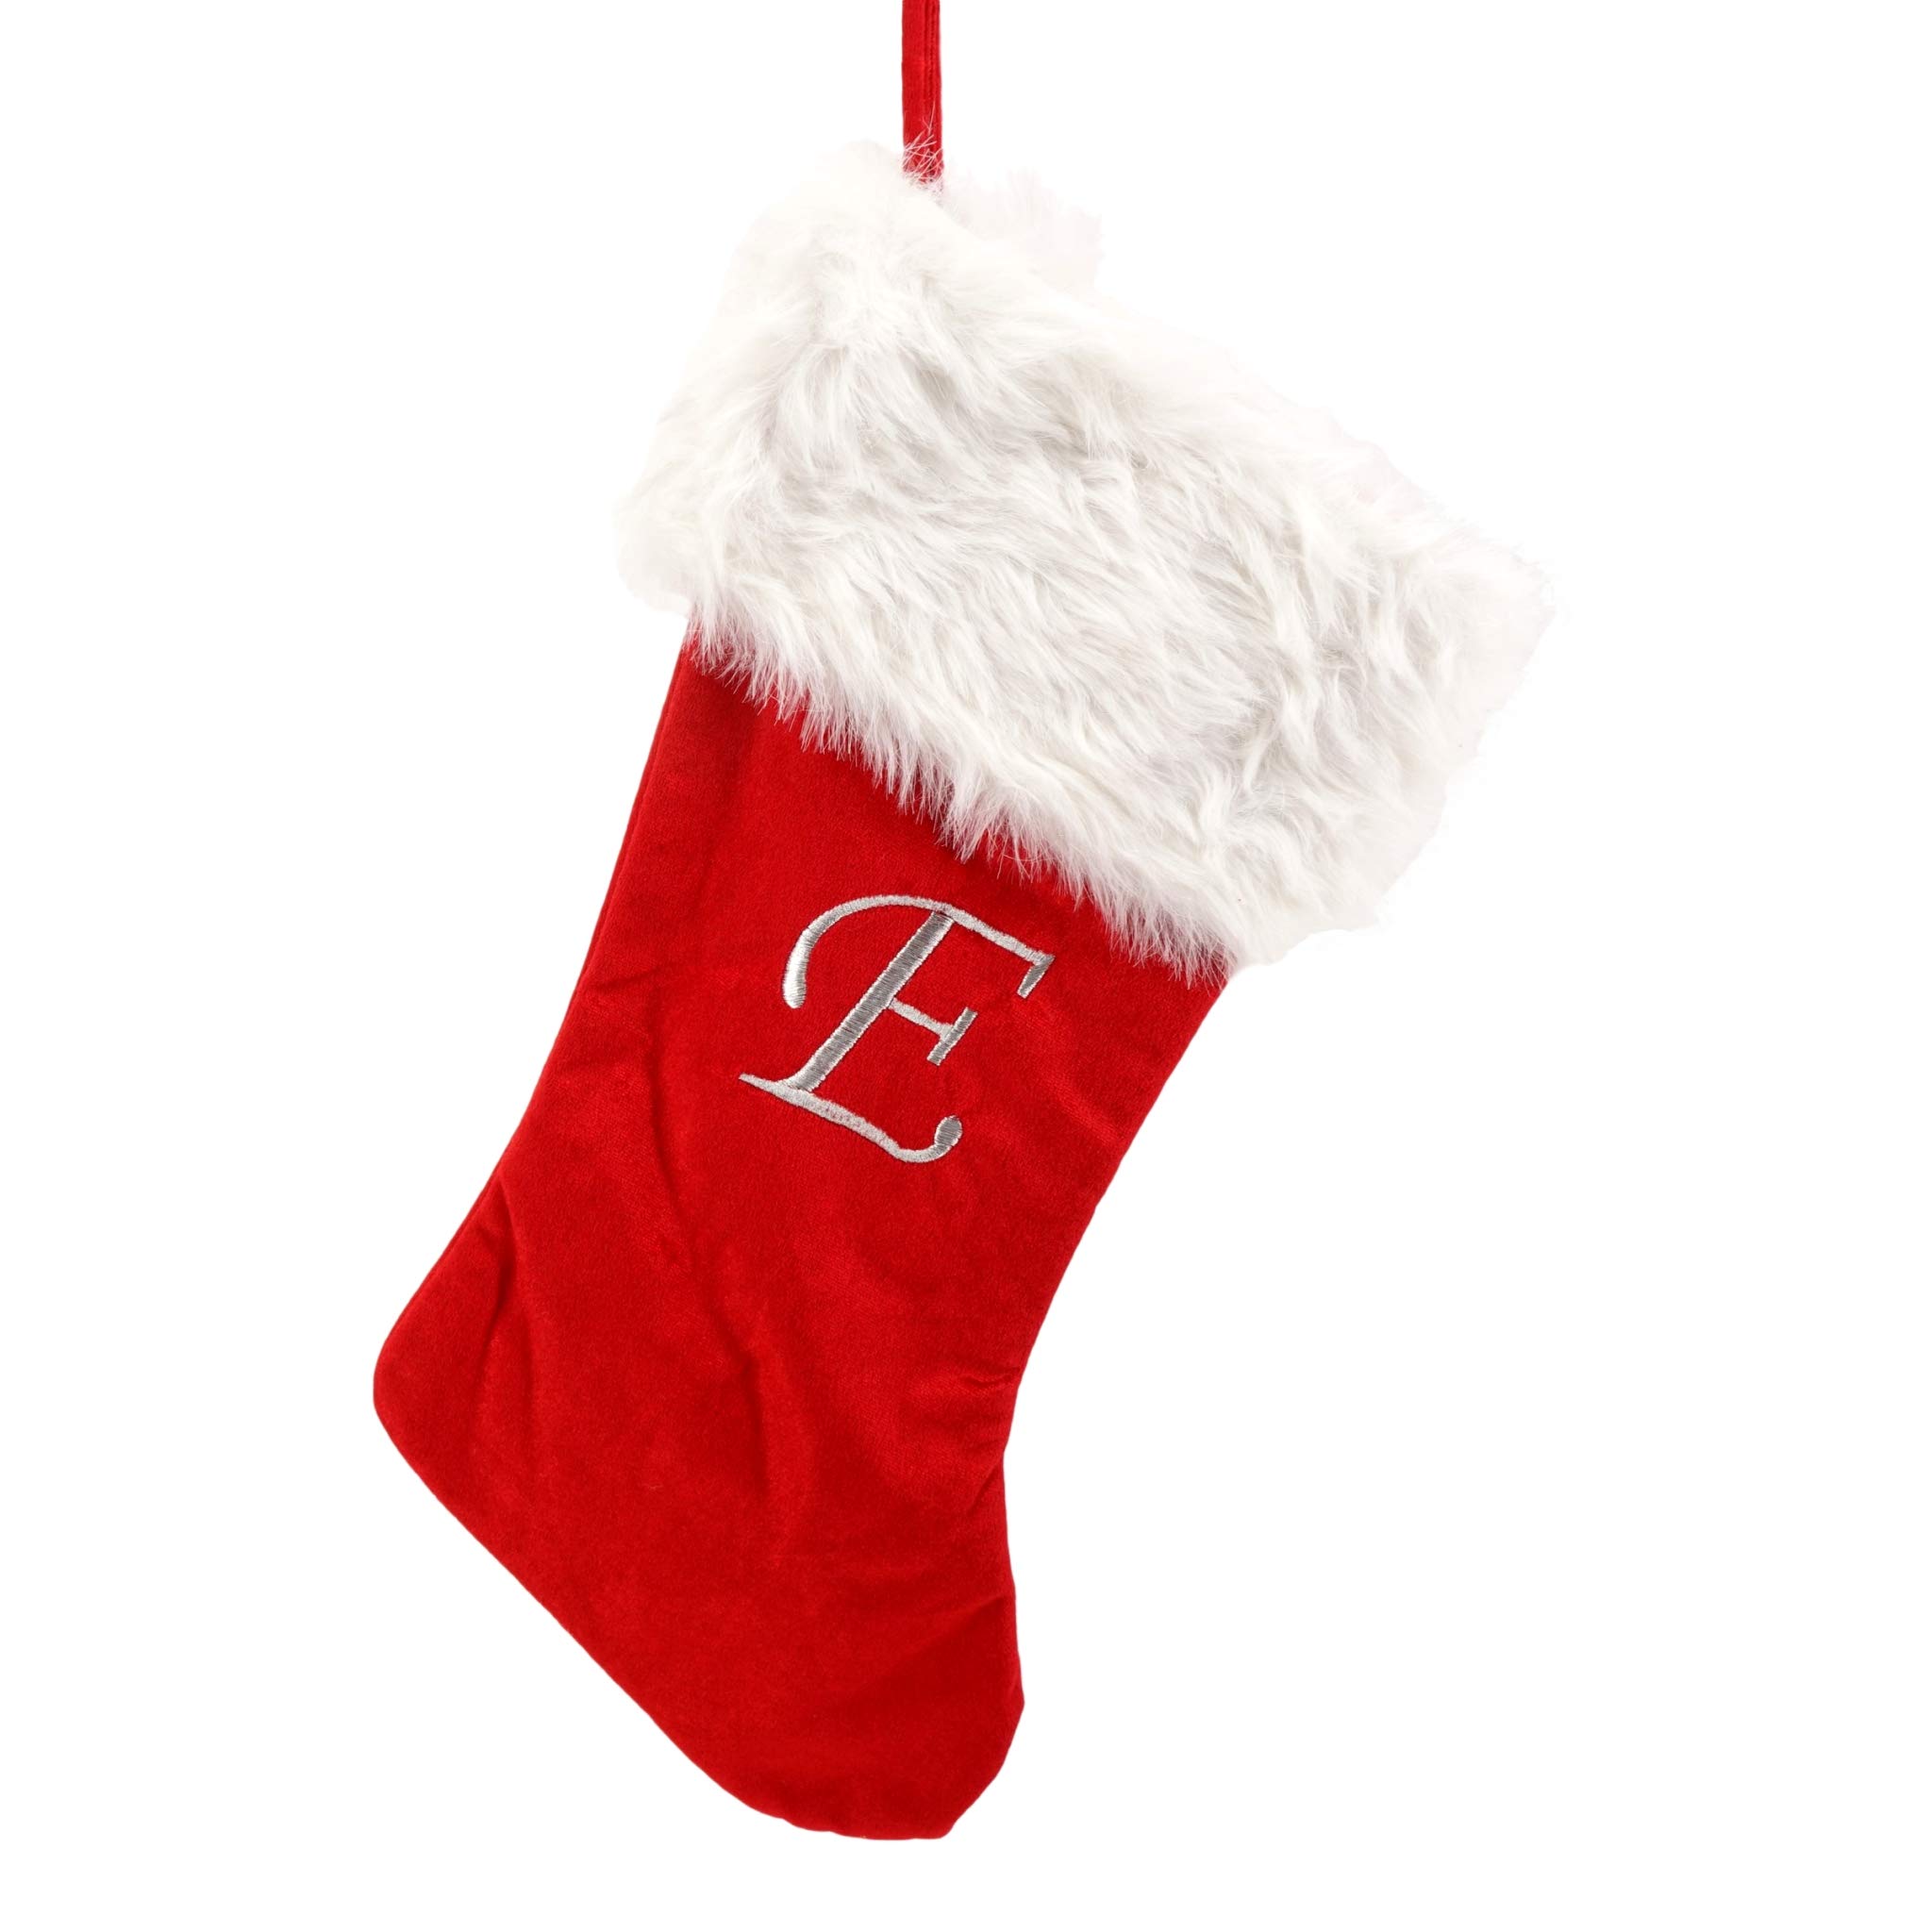 Christmas Stocking (Monogrammed Letter) White Cuff Holiday Fireplace | eBay